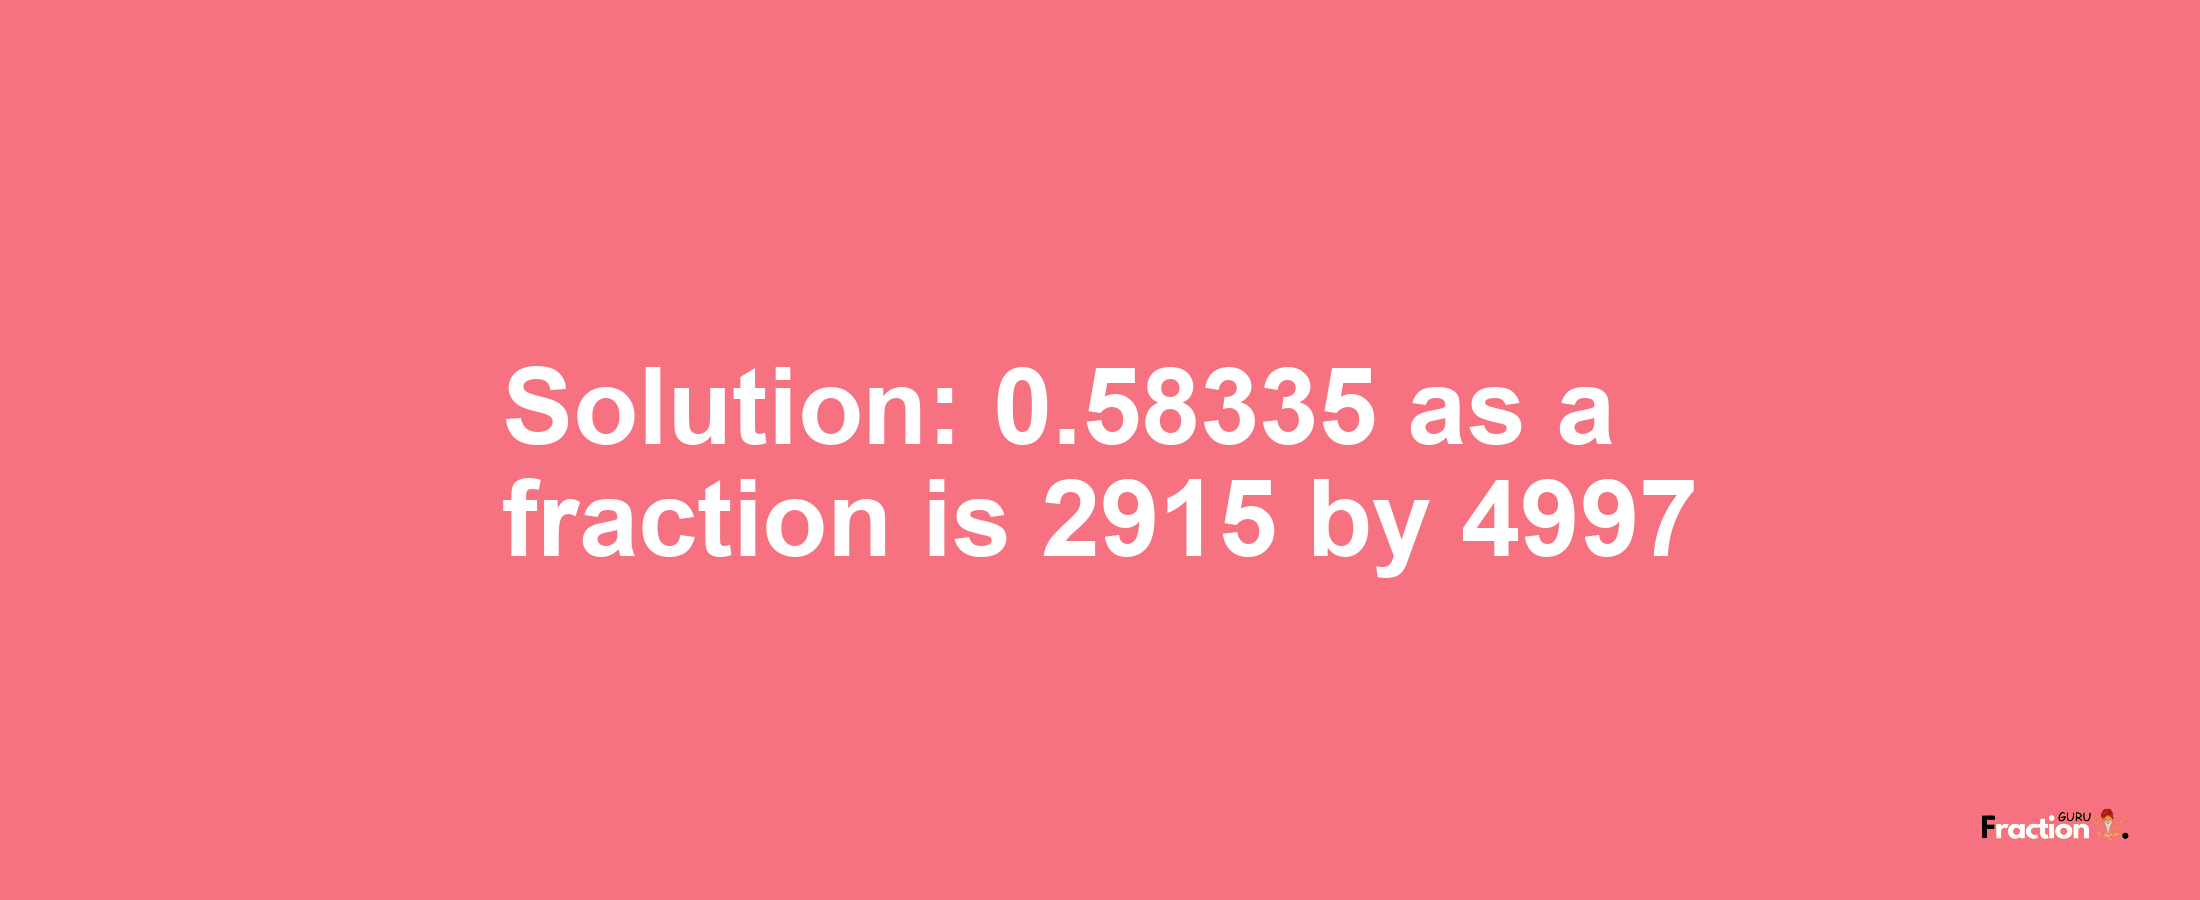 Solution:0.58335 as a fraction is 2915/4997